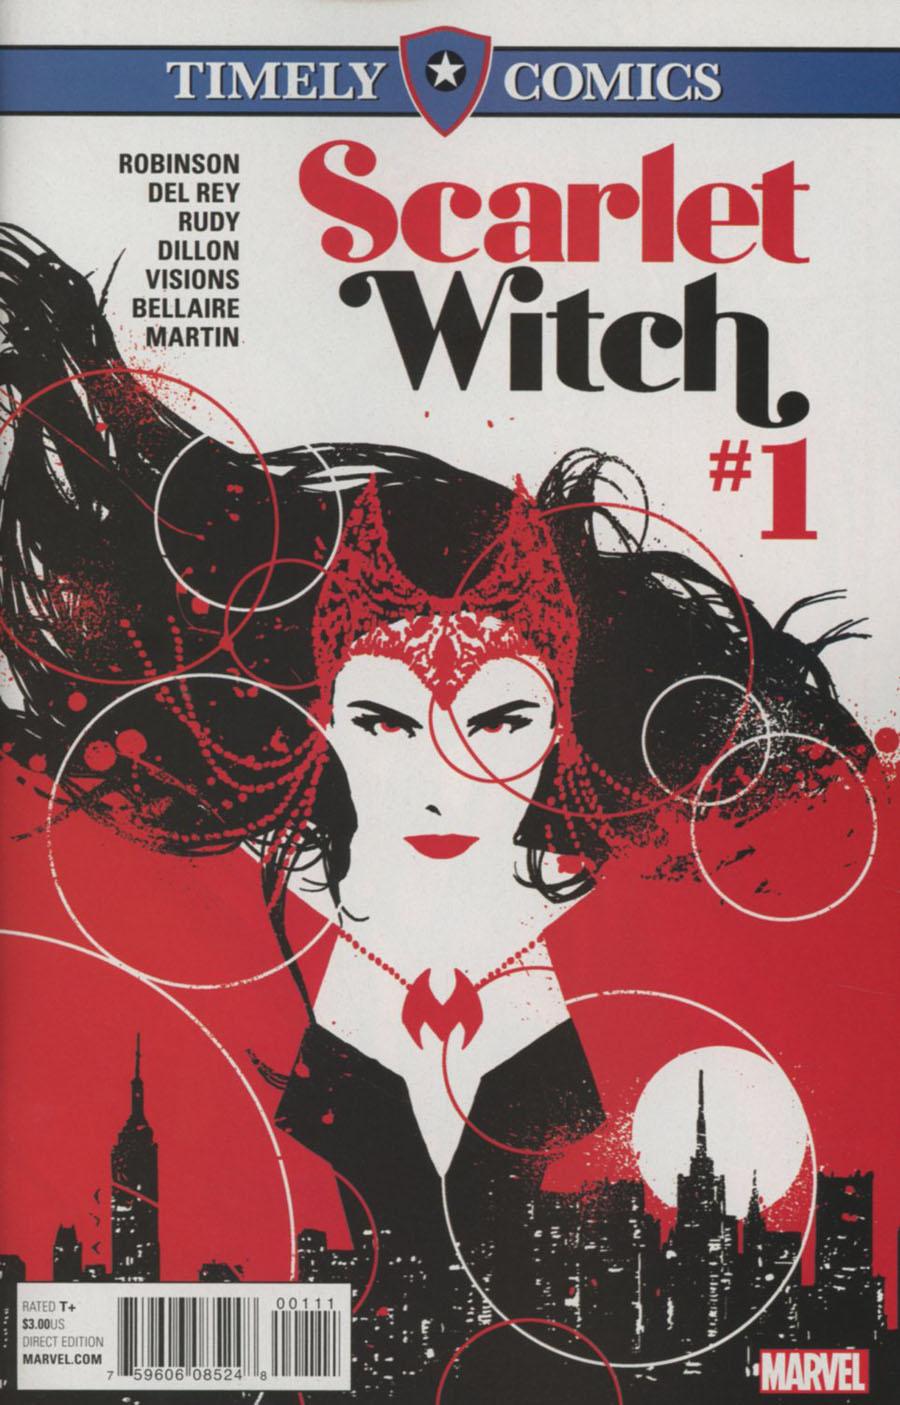 Timely Comics Scarlet Witch Vol. 2 #1